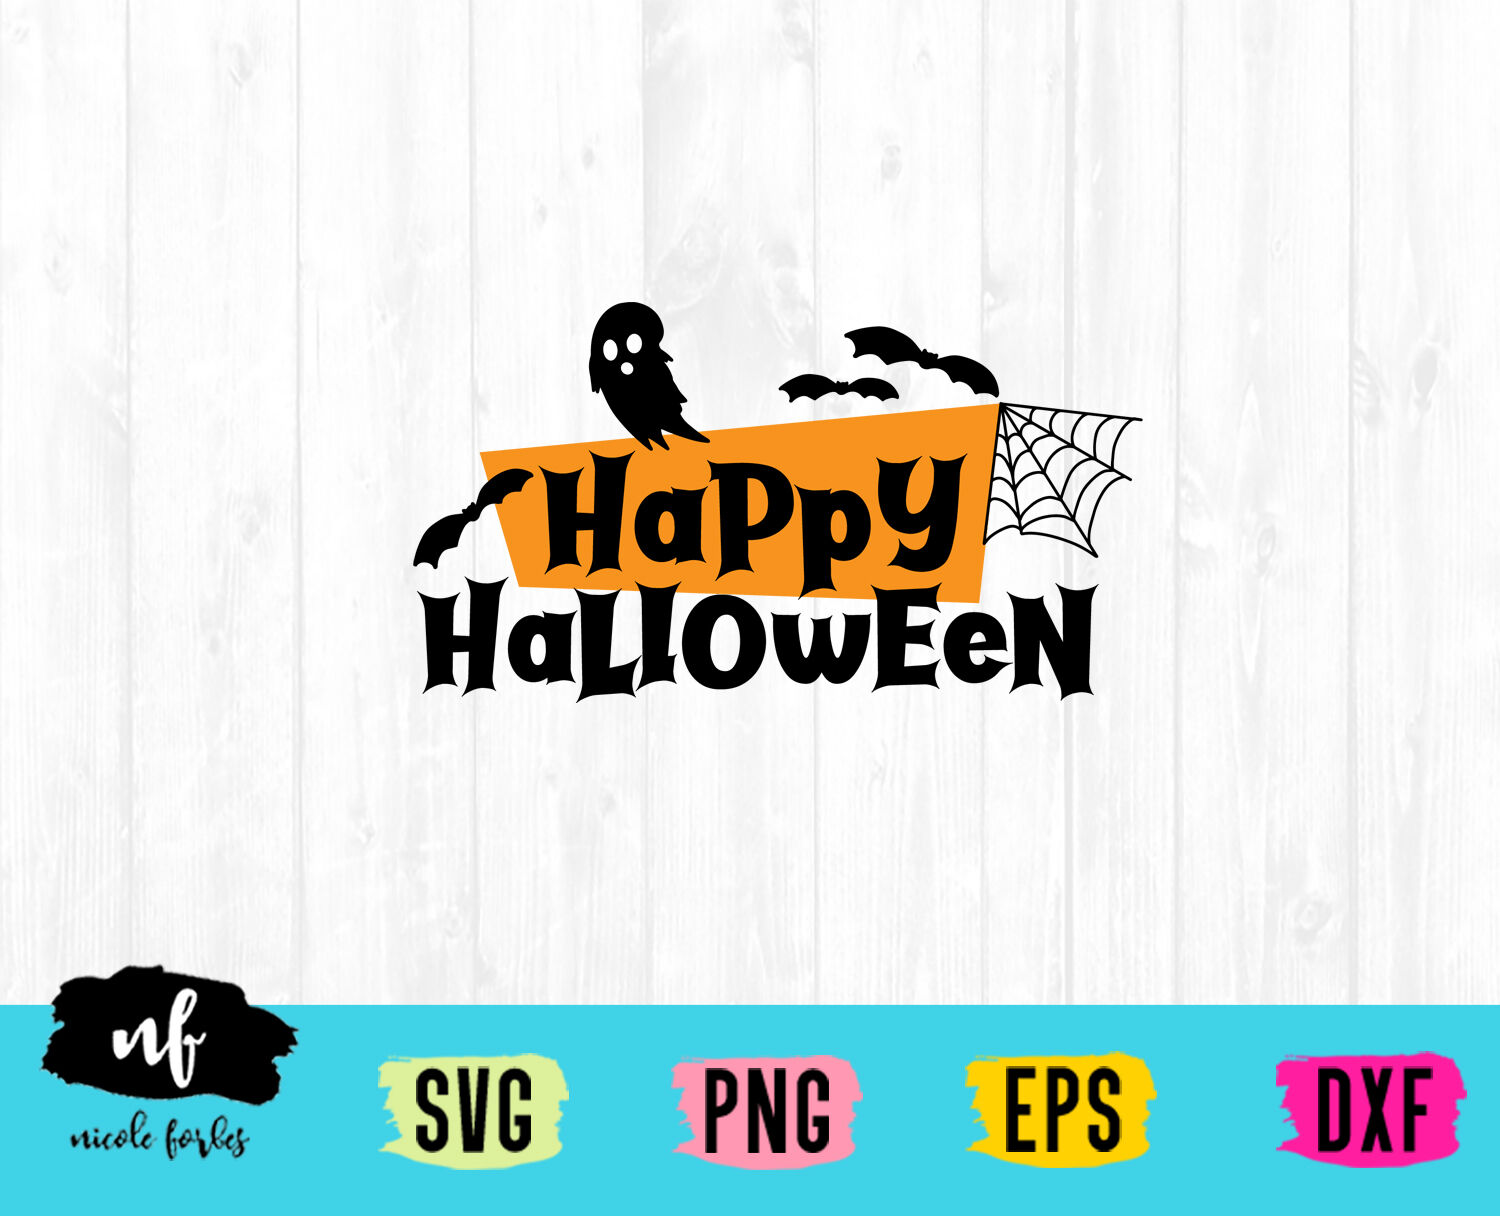 Happy Halloween Svg Cut File By Nicole Forbes Designs Thehungryjpeg Com